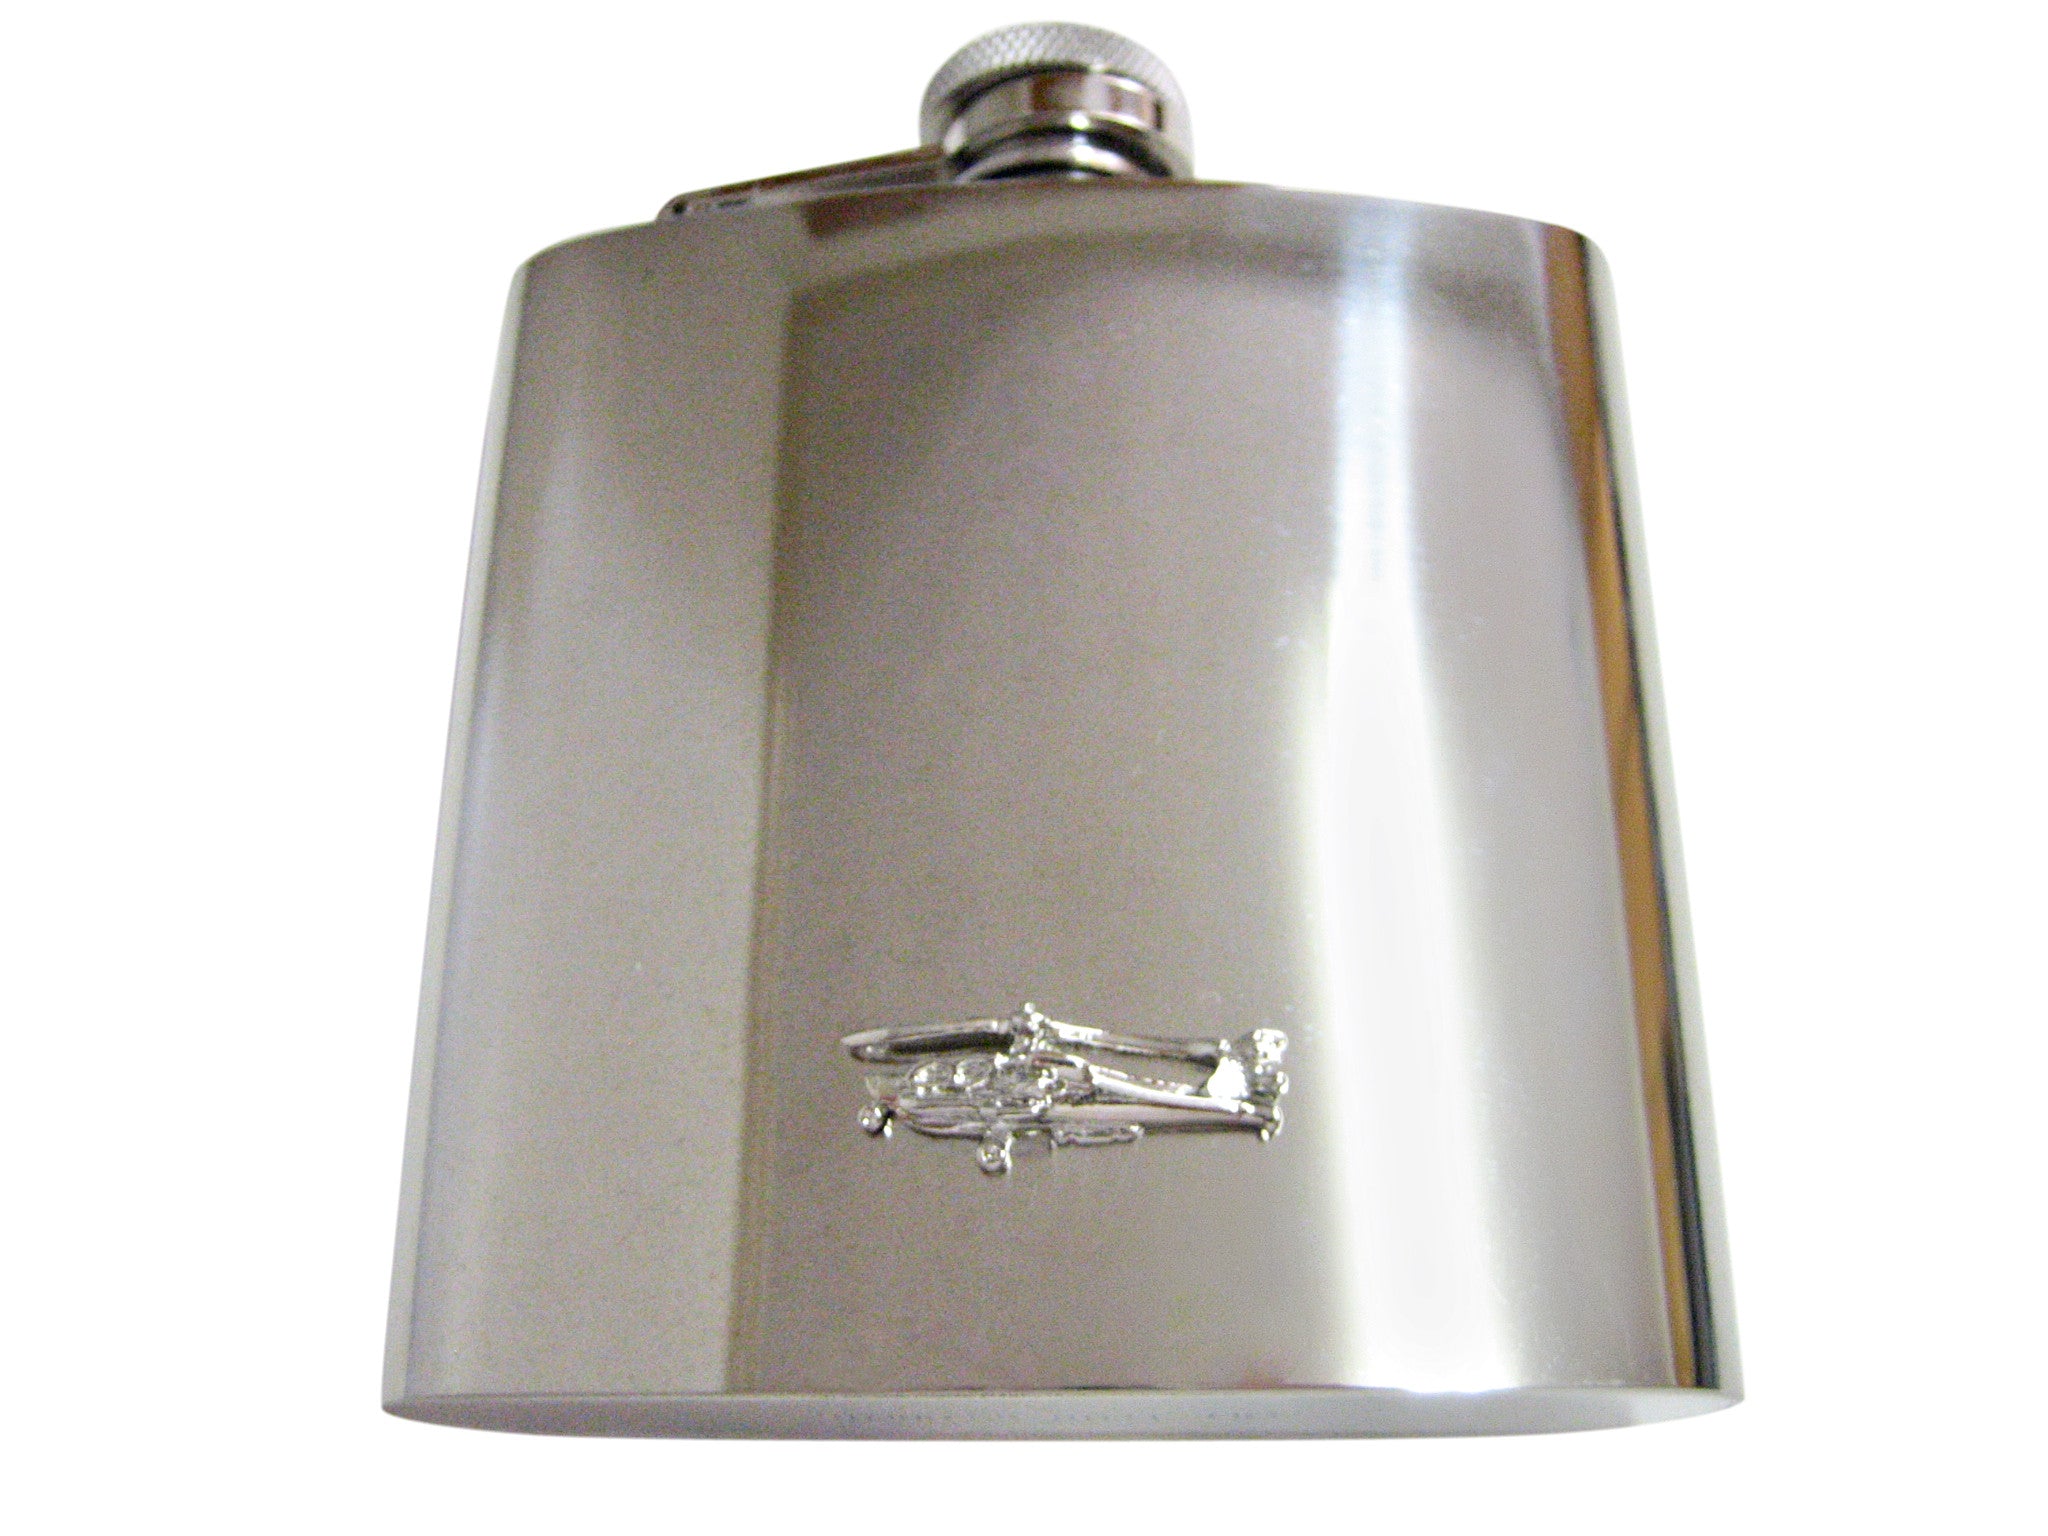 Apache Attack Helicopter 6 Oz. Stainless Steel Flask